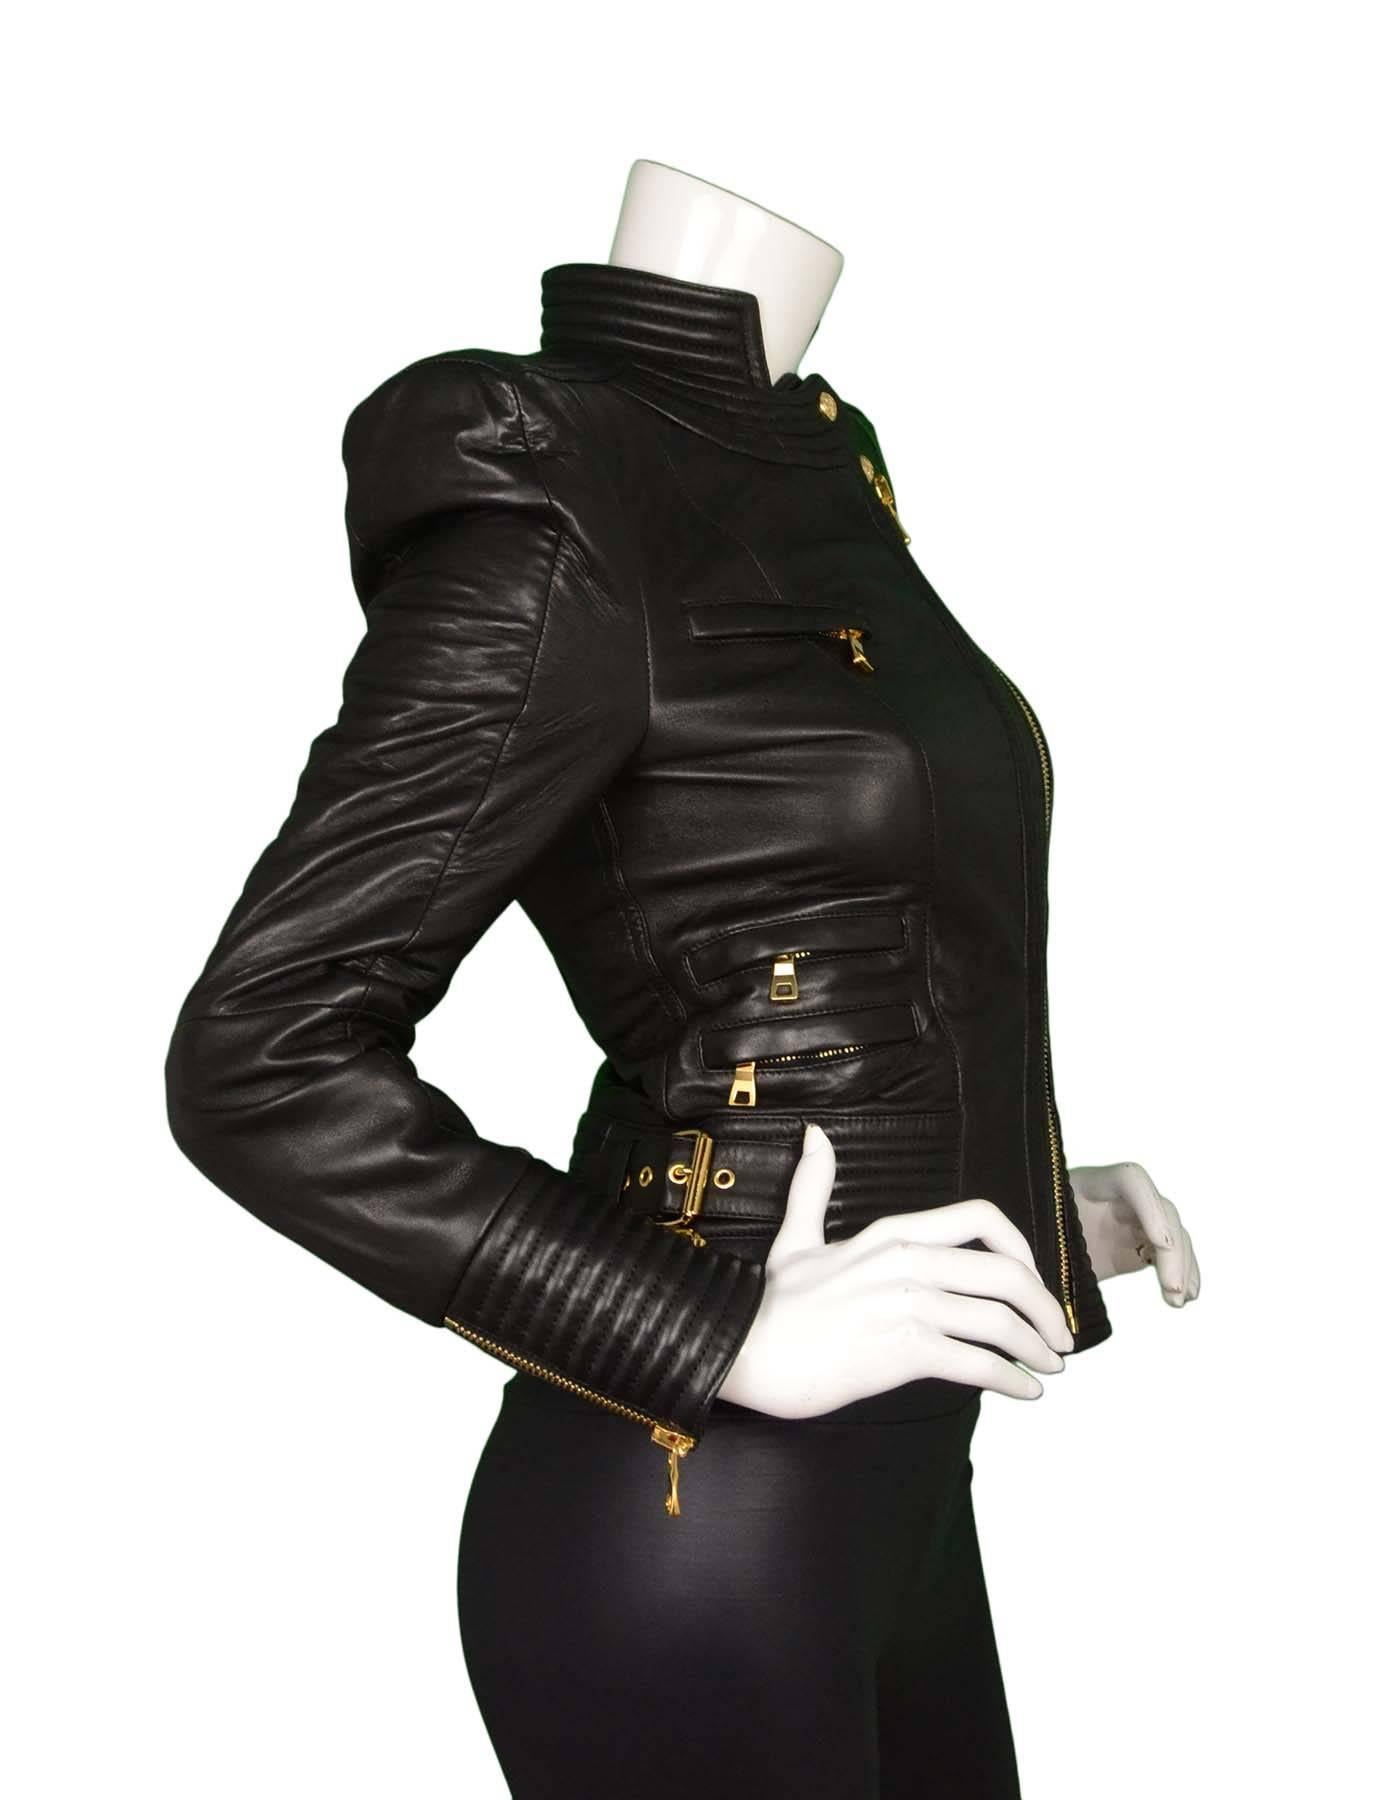 Balmain Black Quilted Leather Biker Jacket 
Features gold buckle and zipper hardware throughout
Made In: Turkey
Color: Black 
Composition: 100% leather
Lining: 52% viscose, 48% cotton
Closure/Opening: Zip front
Exterior Pockets: Five zipper